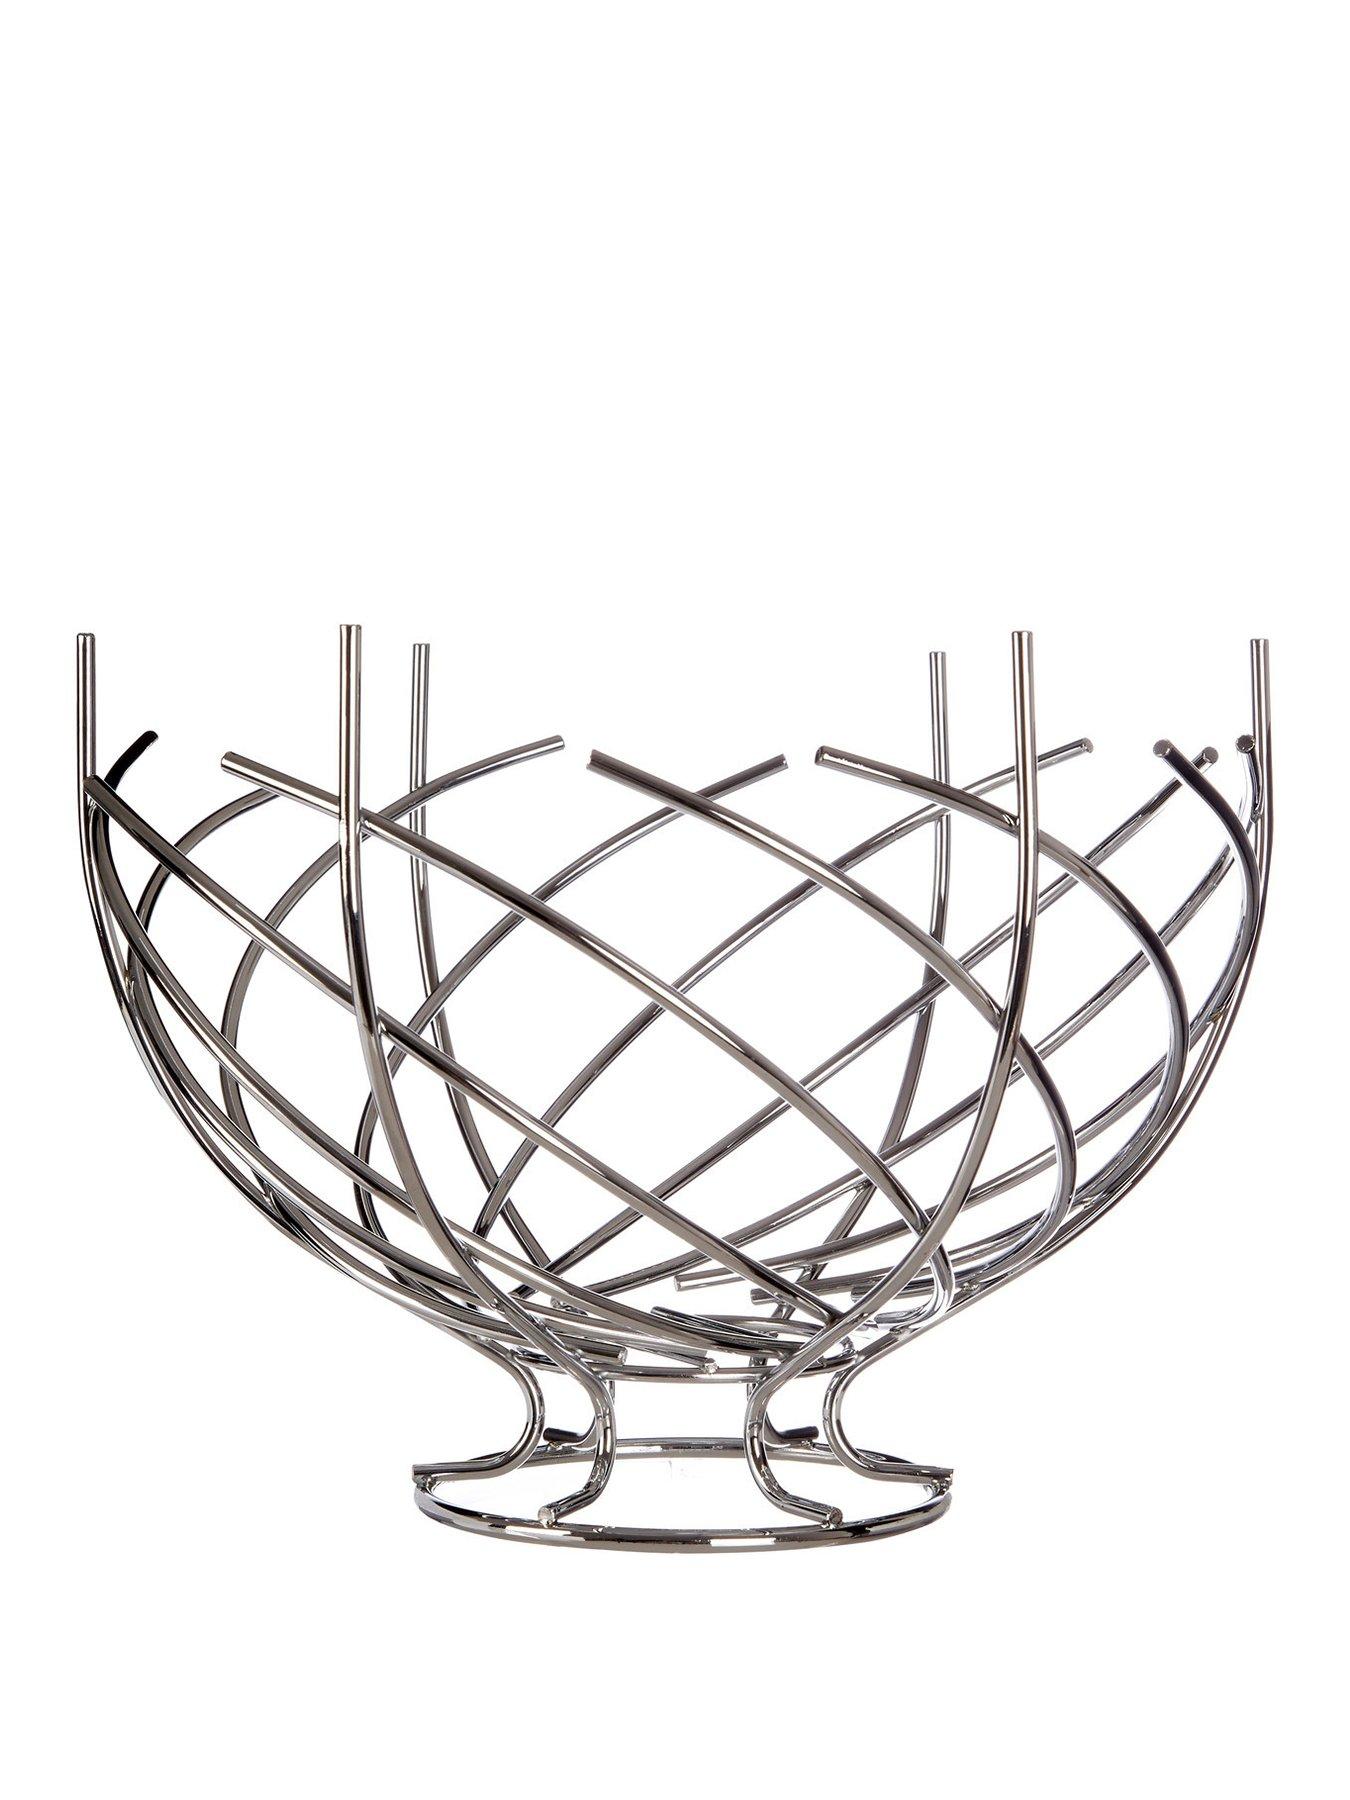 Premier Housewares Round Chrome Wire Fruit Bowl with Rubber Wood Base